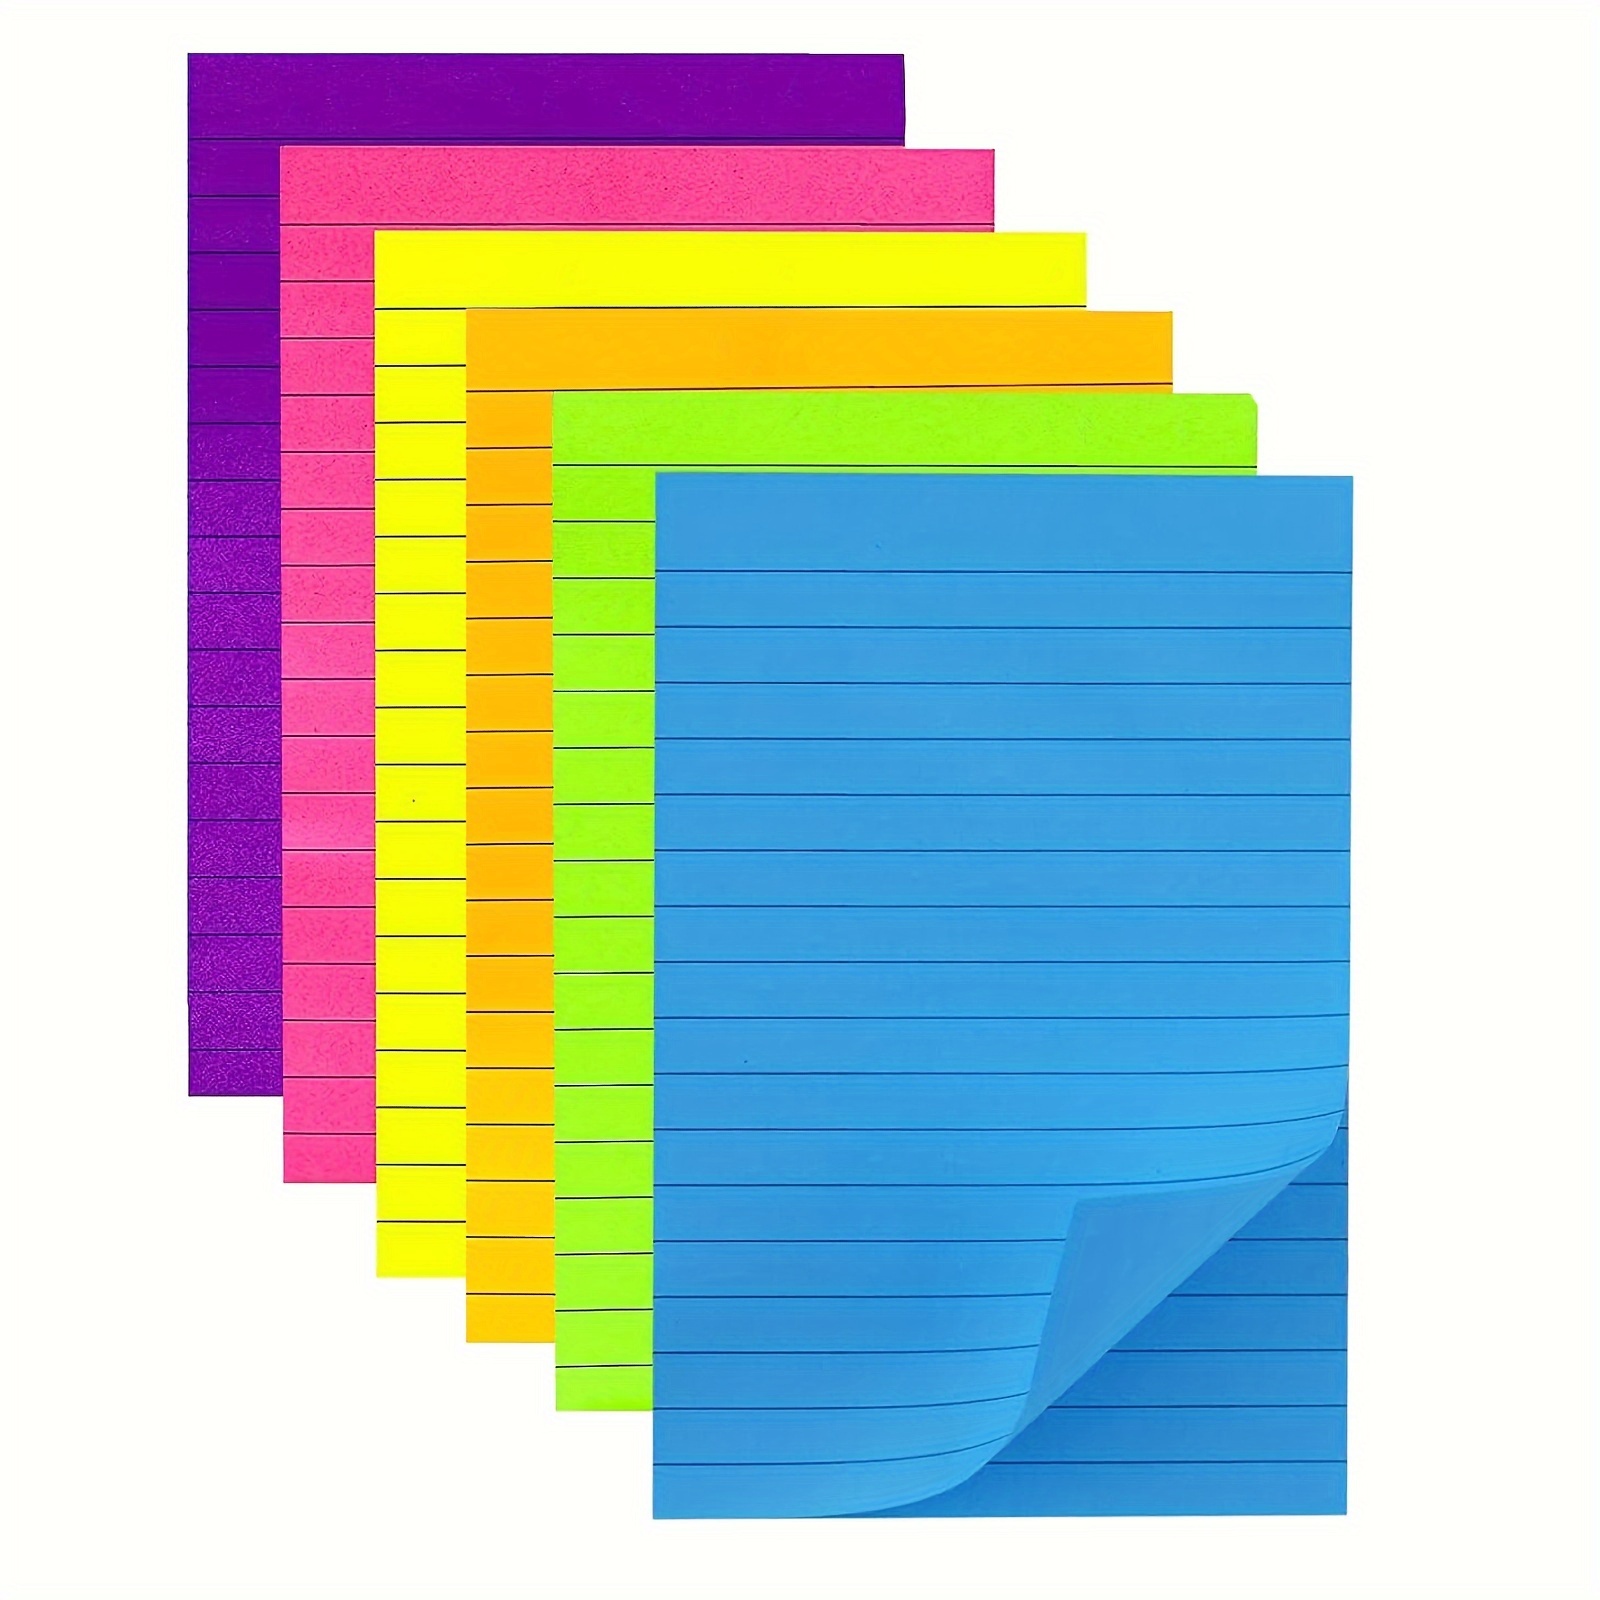 (8 Pack) Lined Sticky Notes 4X6 in Post, 8 Bright Colors Large Ruled Post  Stickies Colorful Super Sticking Power Memo Pads Strong Adhesive,Sticky